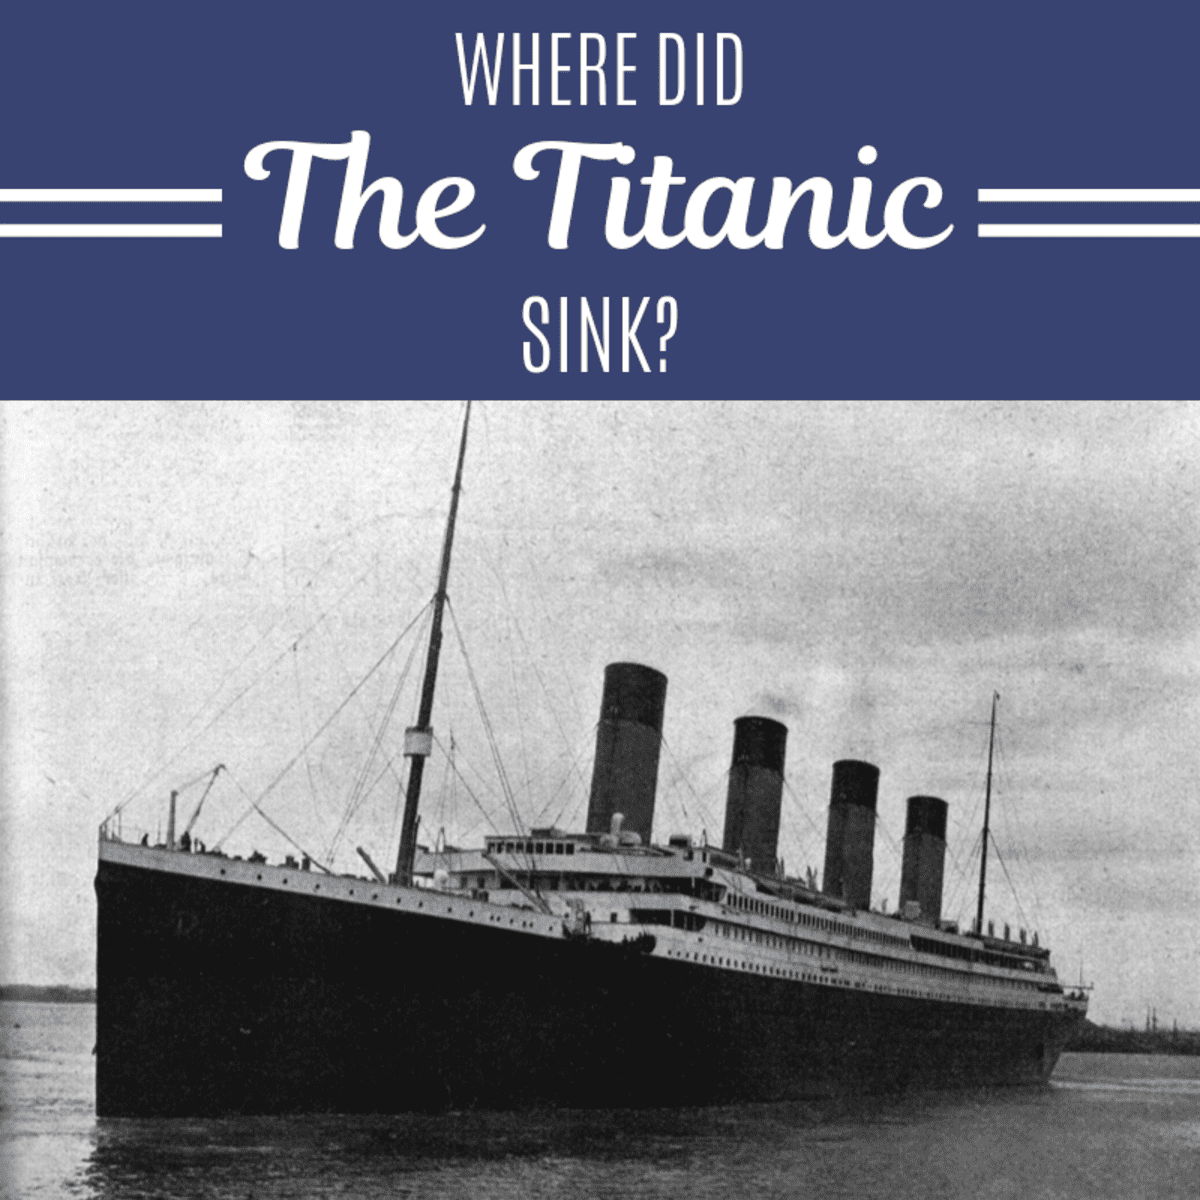 Where Did the Titanic Sink? - Owlcation